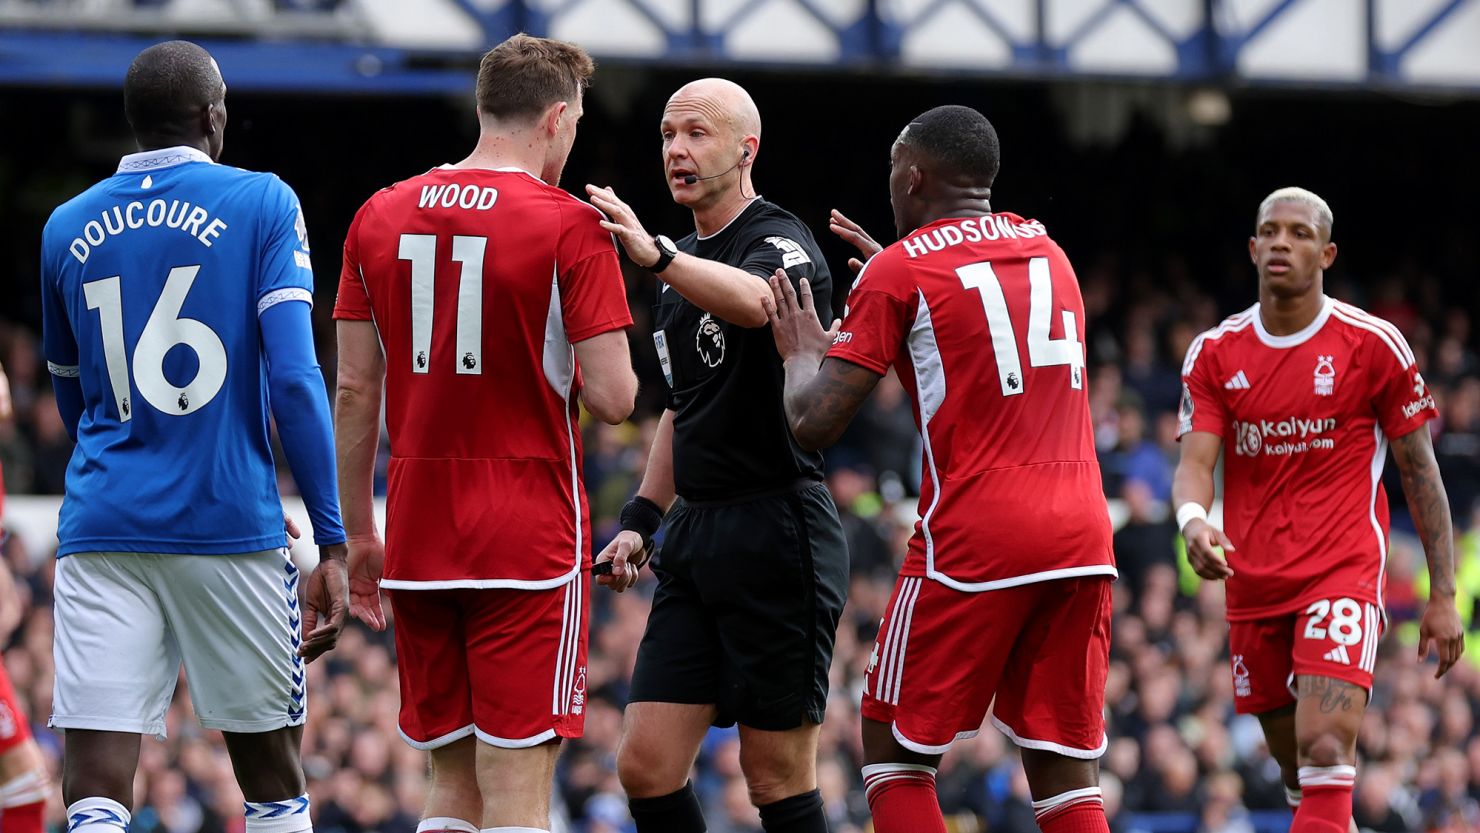 Nottingham Forest thought it should have been awarded three penalties in the defeat to Everton.